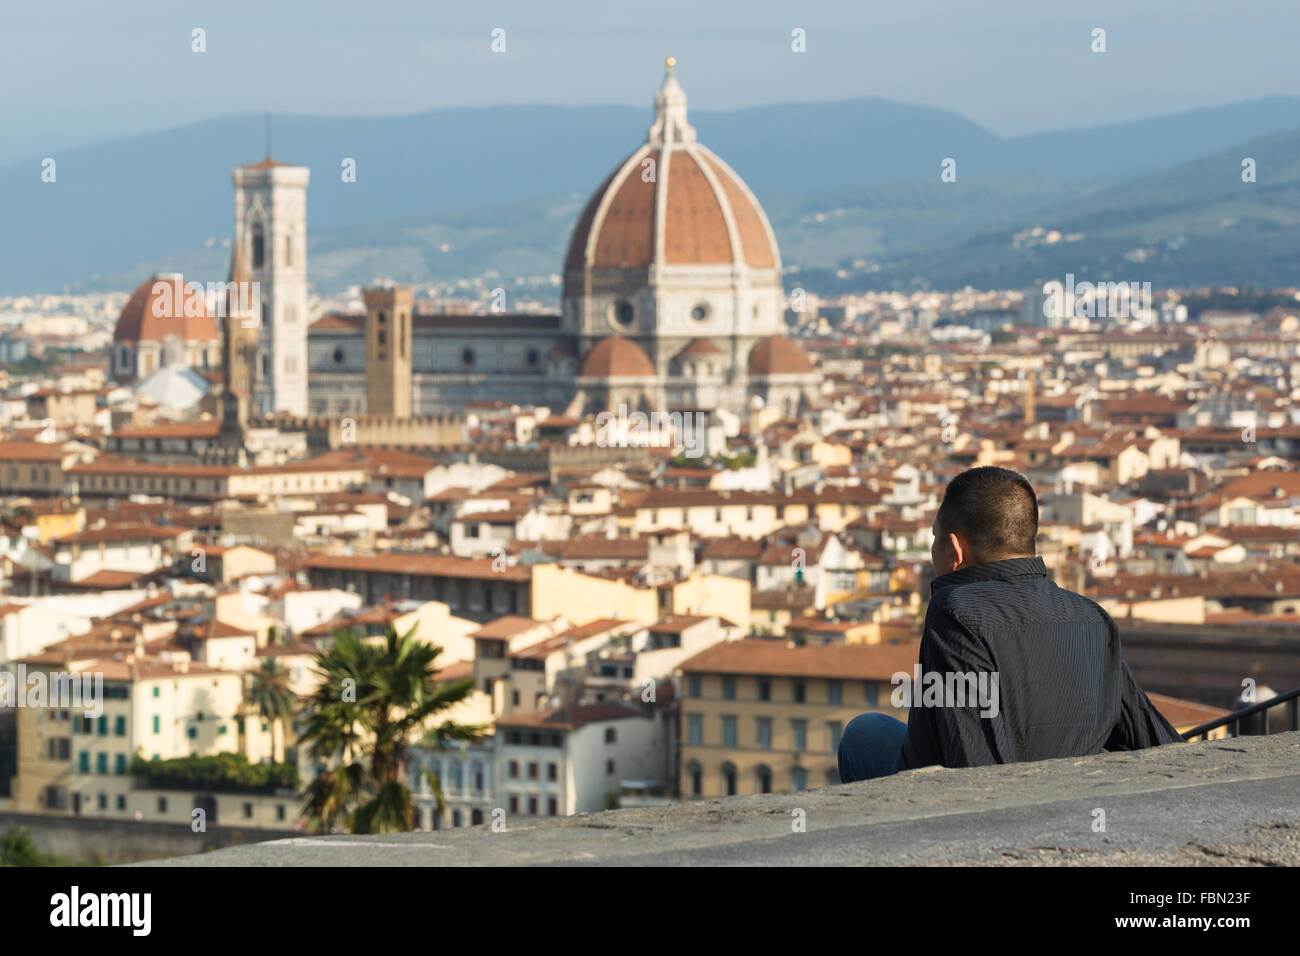 A young man enjoying the view of Santa María del Fiore Cathedral from Piazzale Michelangelo, Florence, Tuscany, Italy. Stock Photo